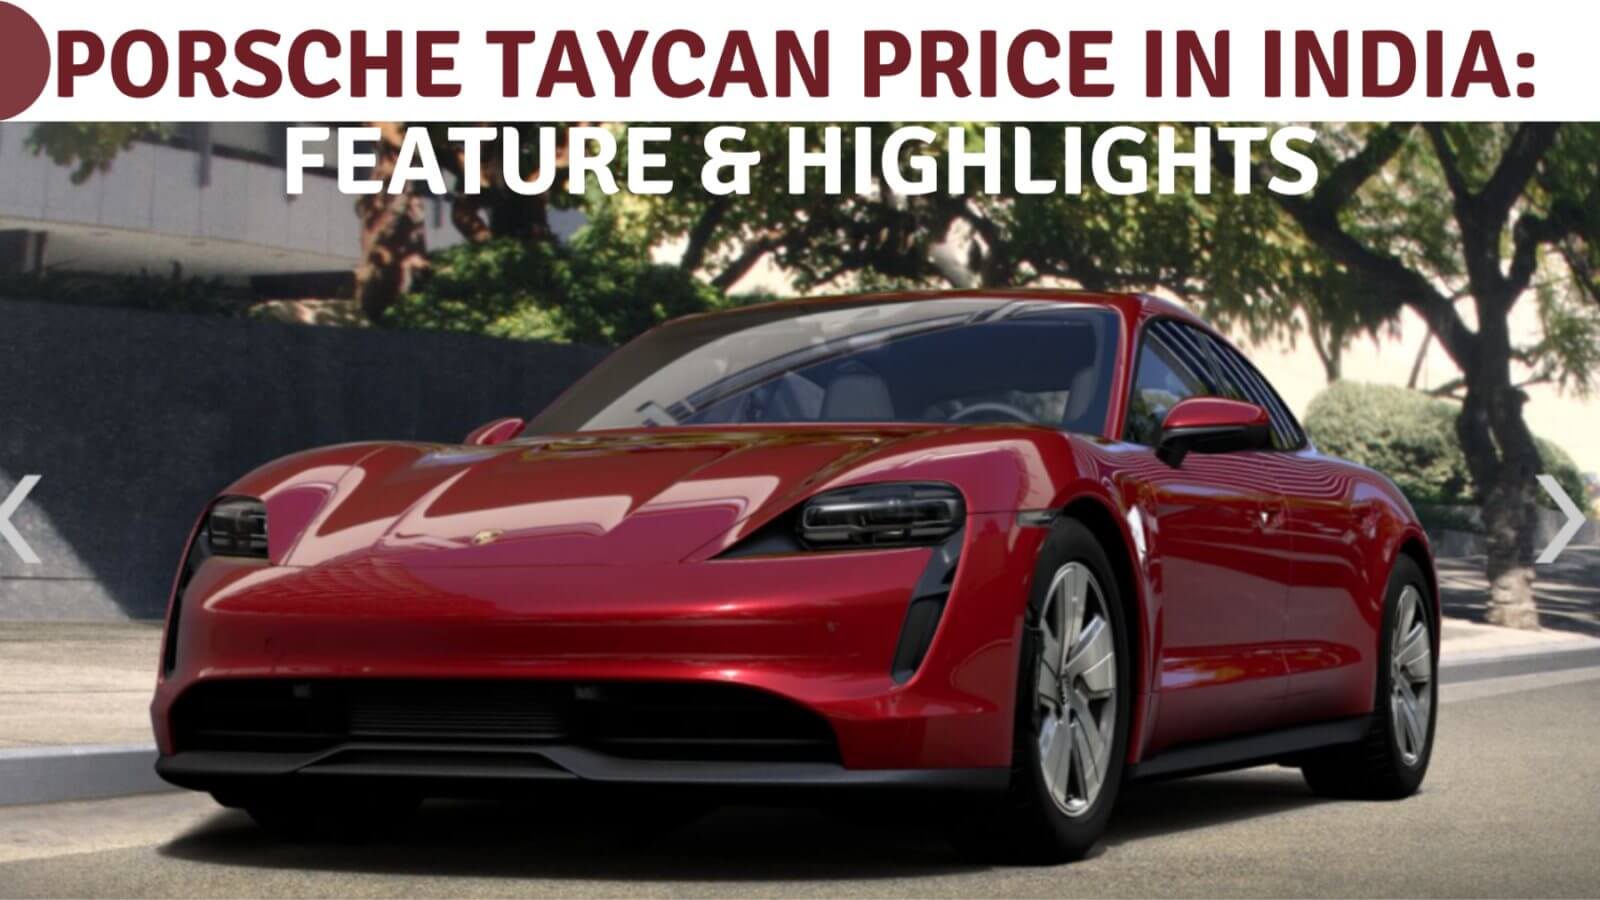 https://e-vehicleinfo.com/porsche-taycan-price-in-india-launch-date-feature-highlights/